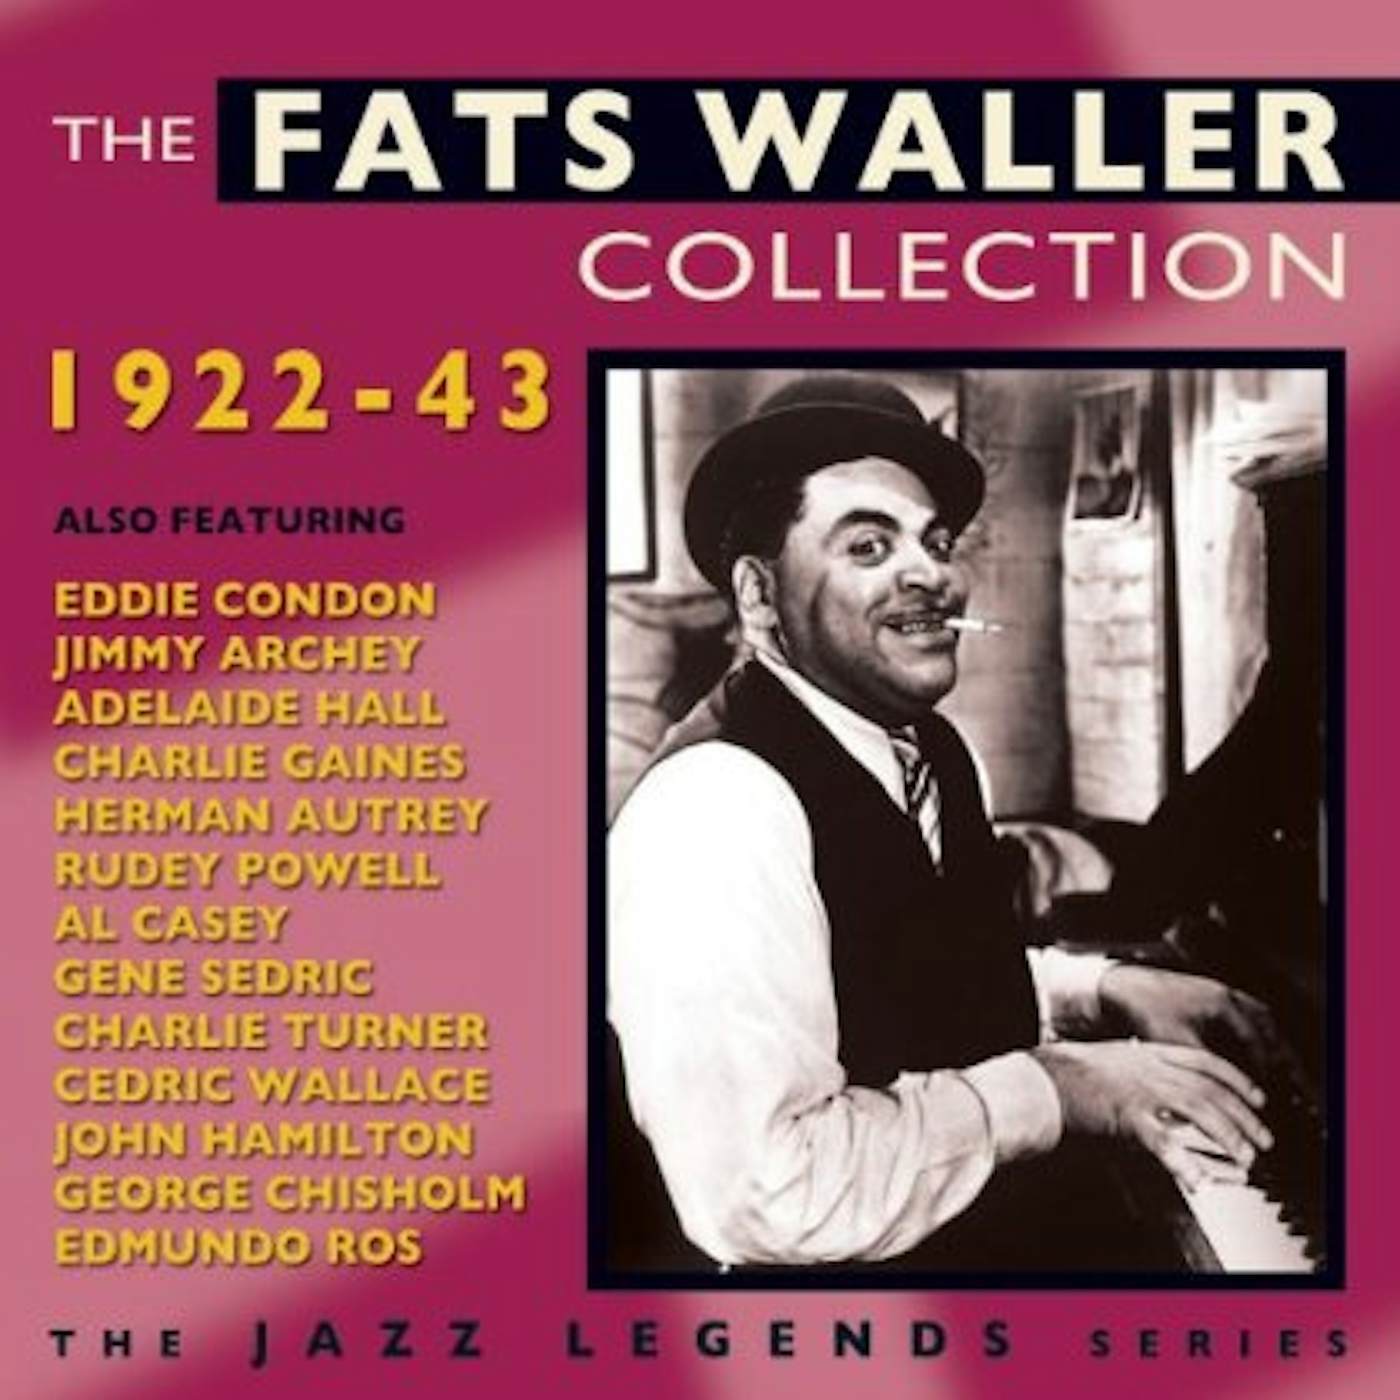 FATS WALLER COLLECTION 1922-43 CD